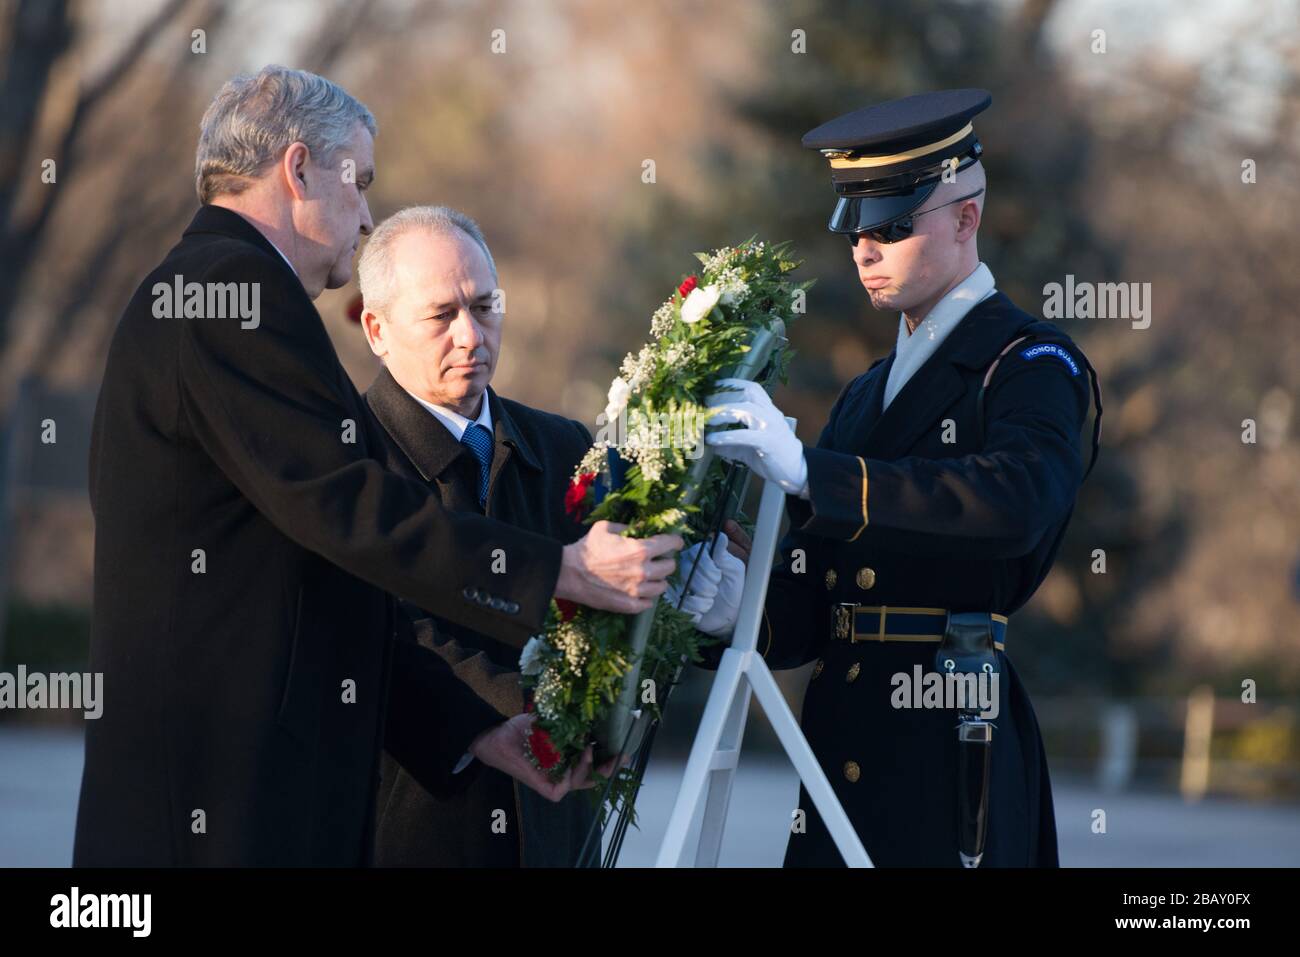 'North Atlantic Treaty Organization Permanent Representatives lay a wreath at the Tomb of the Unknown Soldier at Arlington National Cemetery, Jan. 14, 2016, in Arlington, Va. Dignitaries from all over the world pay respects to those buried at Arlington National Cemetery in more than 3000 ceremonies each year. (U.S. Army photo by Rachel Larue/Arlington National Cemetery/Released); 14 January 2016, 17:18; NATO Permanent Representatives lay a wreath at the Tomb of the Unknown Soldier in Arlington National Cemetery; Arlington National Cemetery; ' Stock Photo